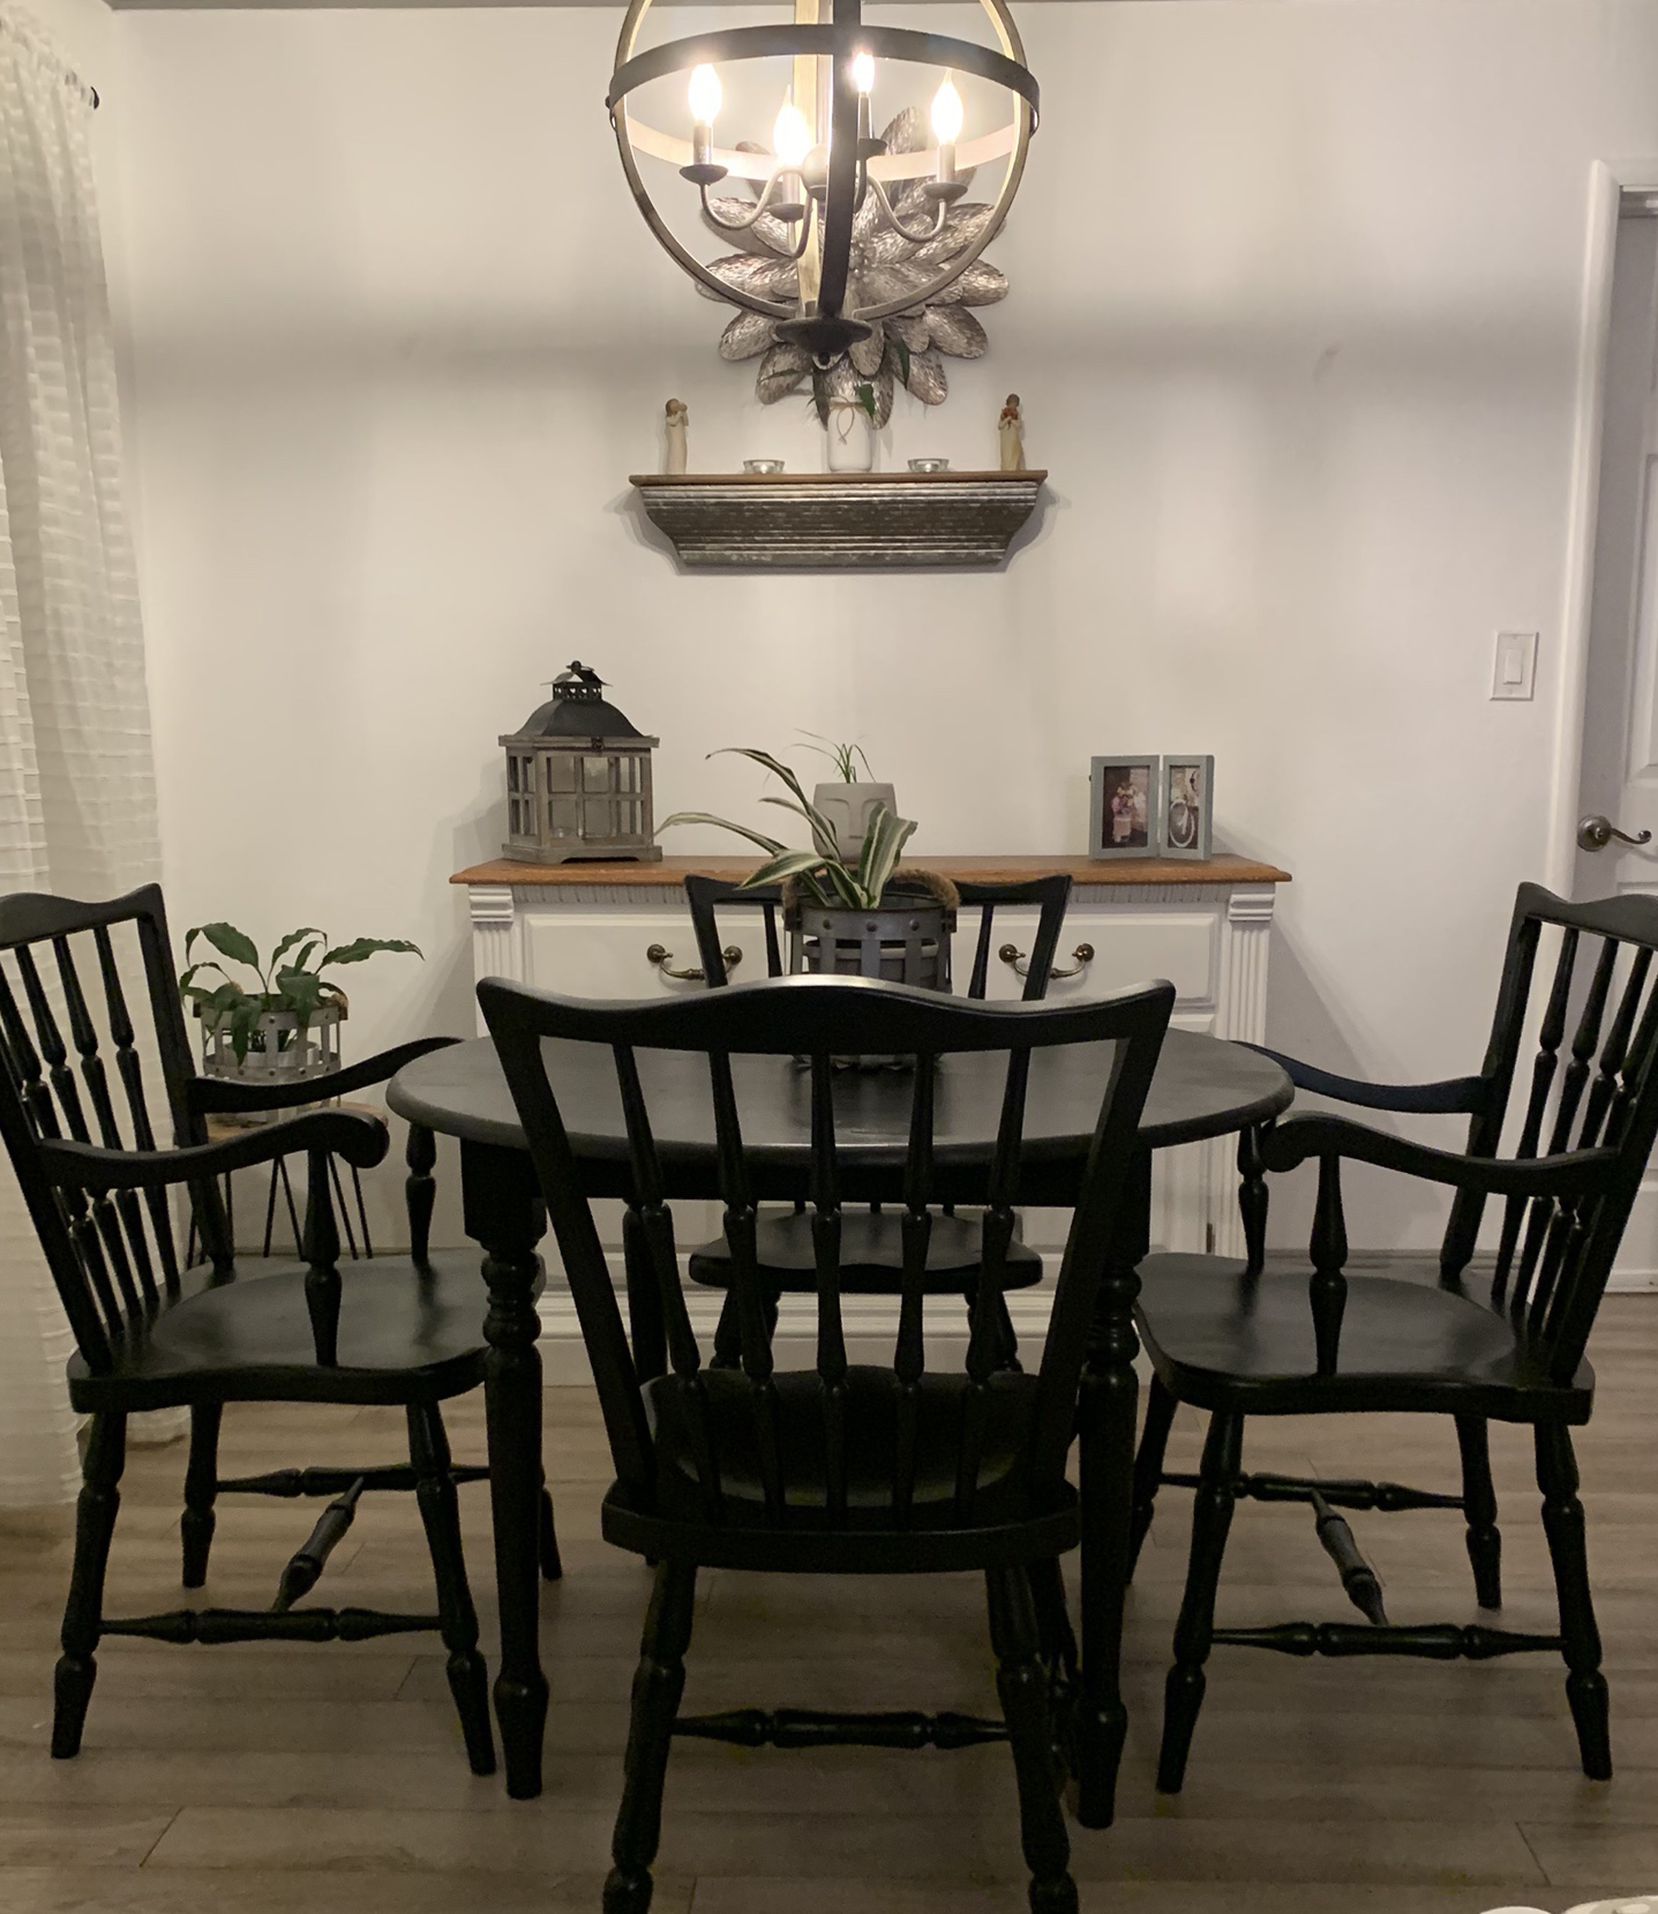 Refinished Table And Chairs